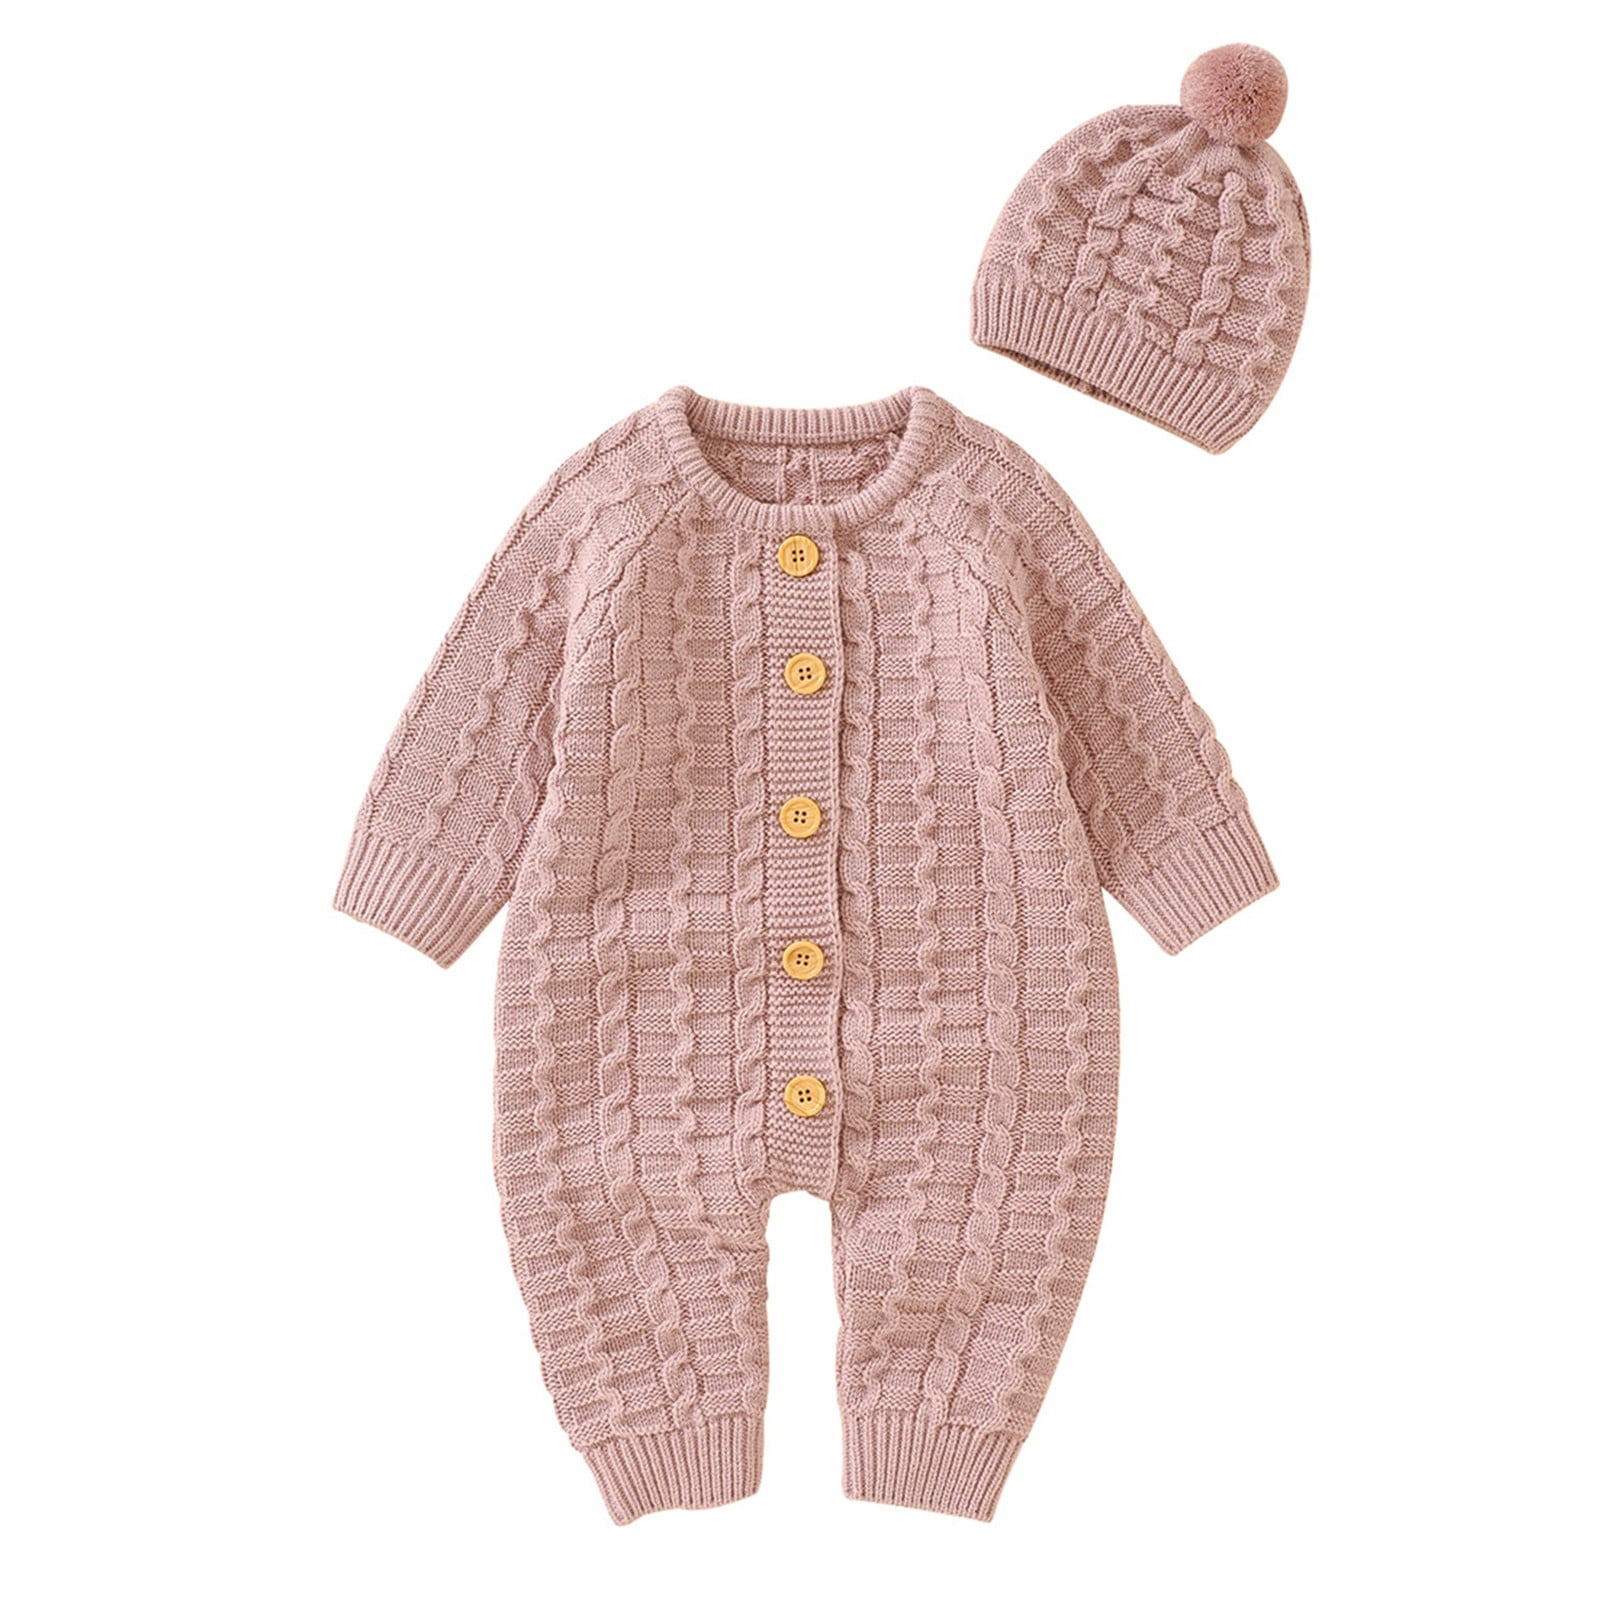 Fsqjgq Boy Boy Girl Solid Knitted Sweater Baby Jumpsuit Romper Cotton Caps Outfits Sets Clothes Boys Cardigan Size 12 Chemical Fiber Pink 74 - Walmart.com